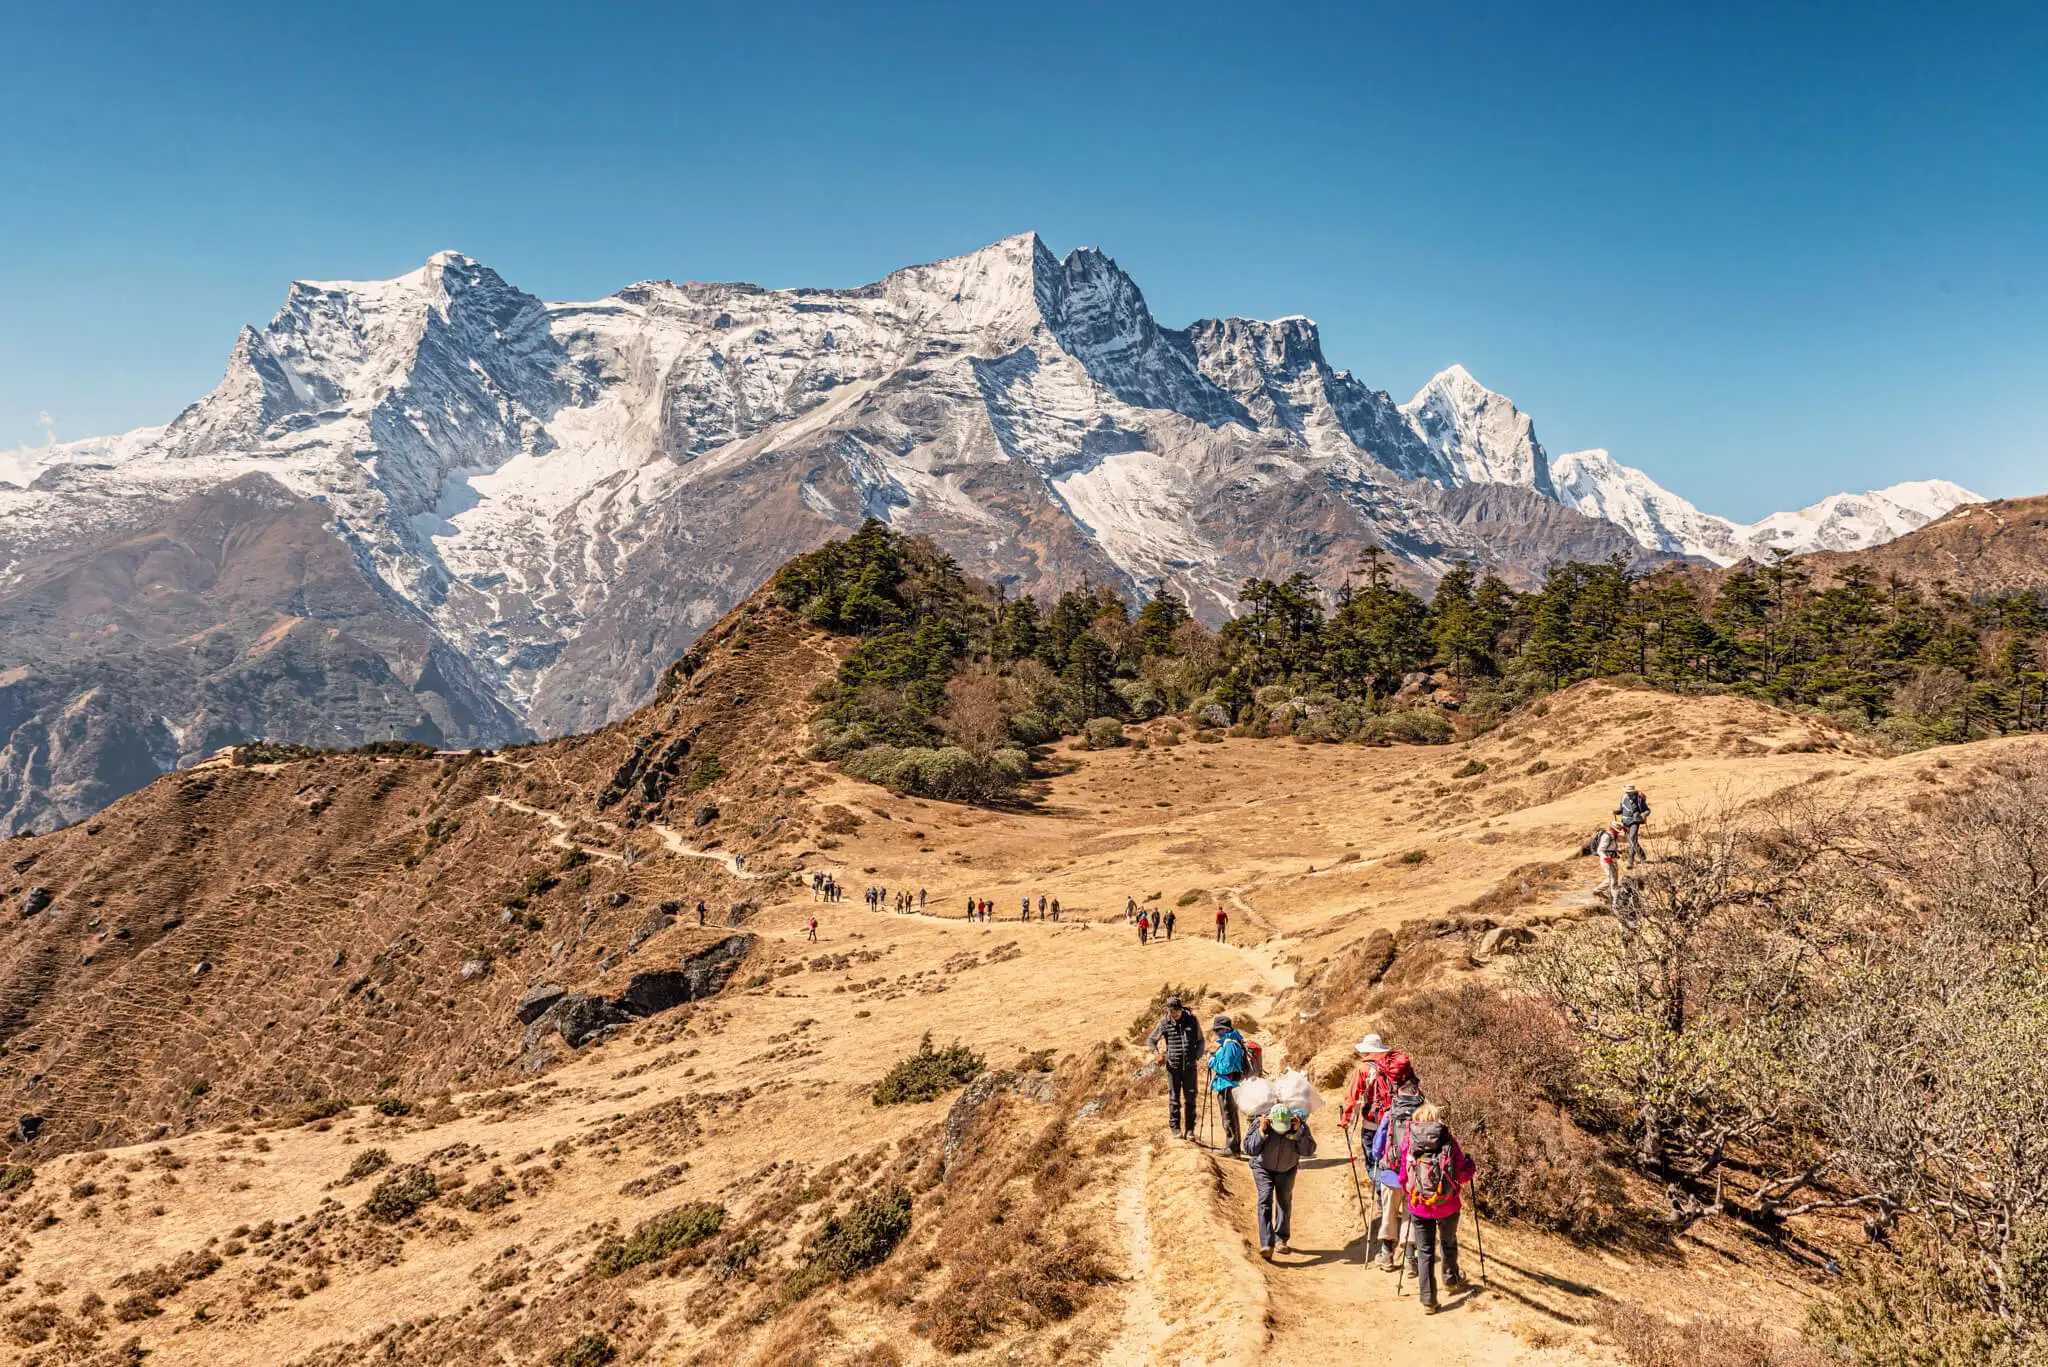 Tourists on the trekking route to Everest Base Camp just outside of Namche Bazar on the way to Everest view Hotel Kongde Ri peak at the background.